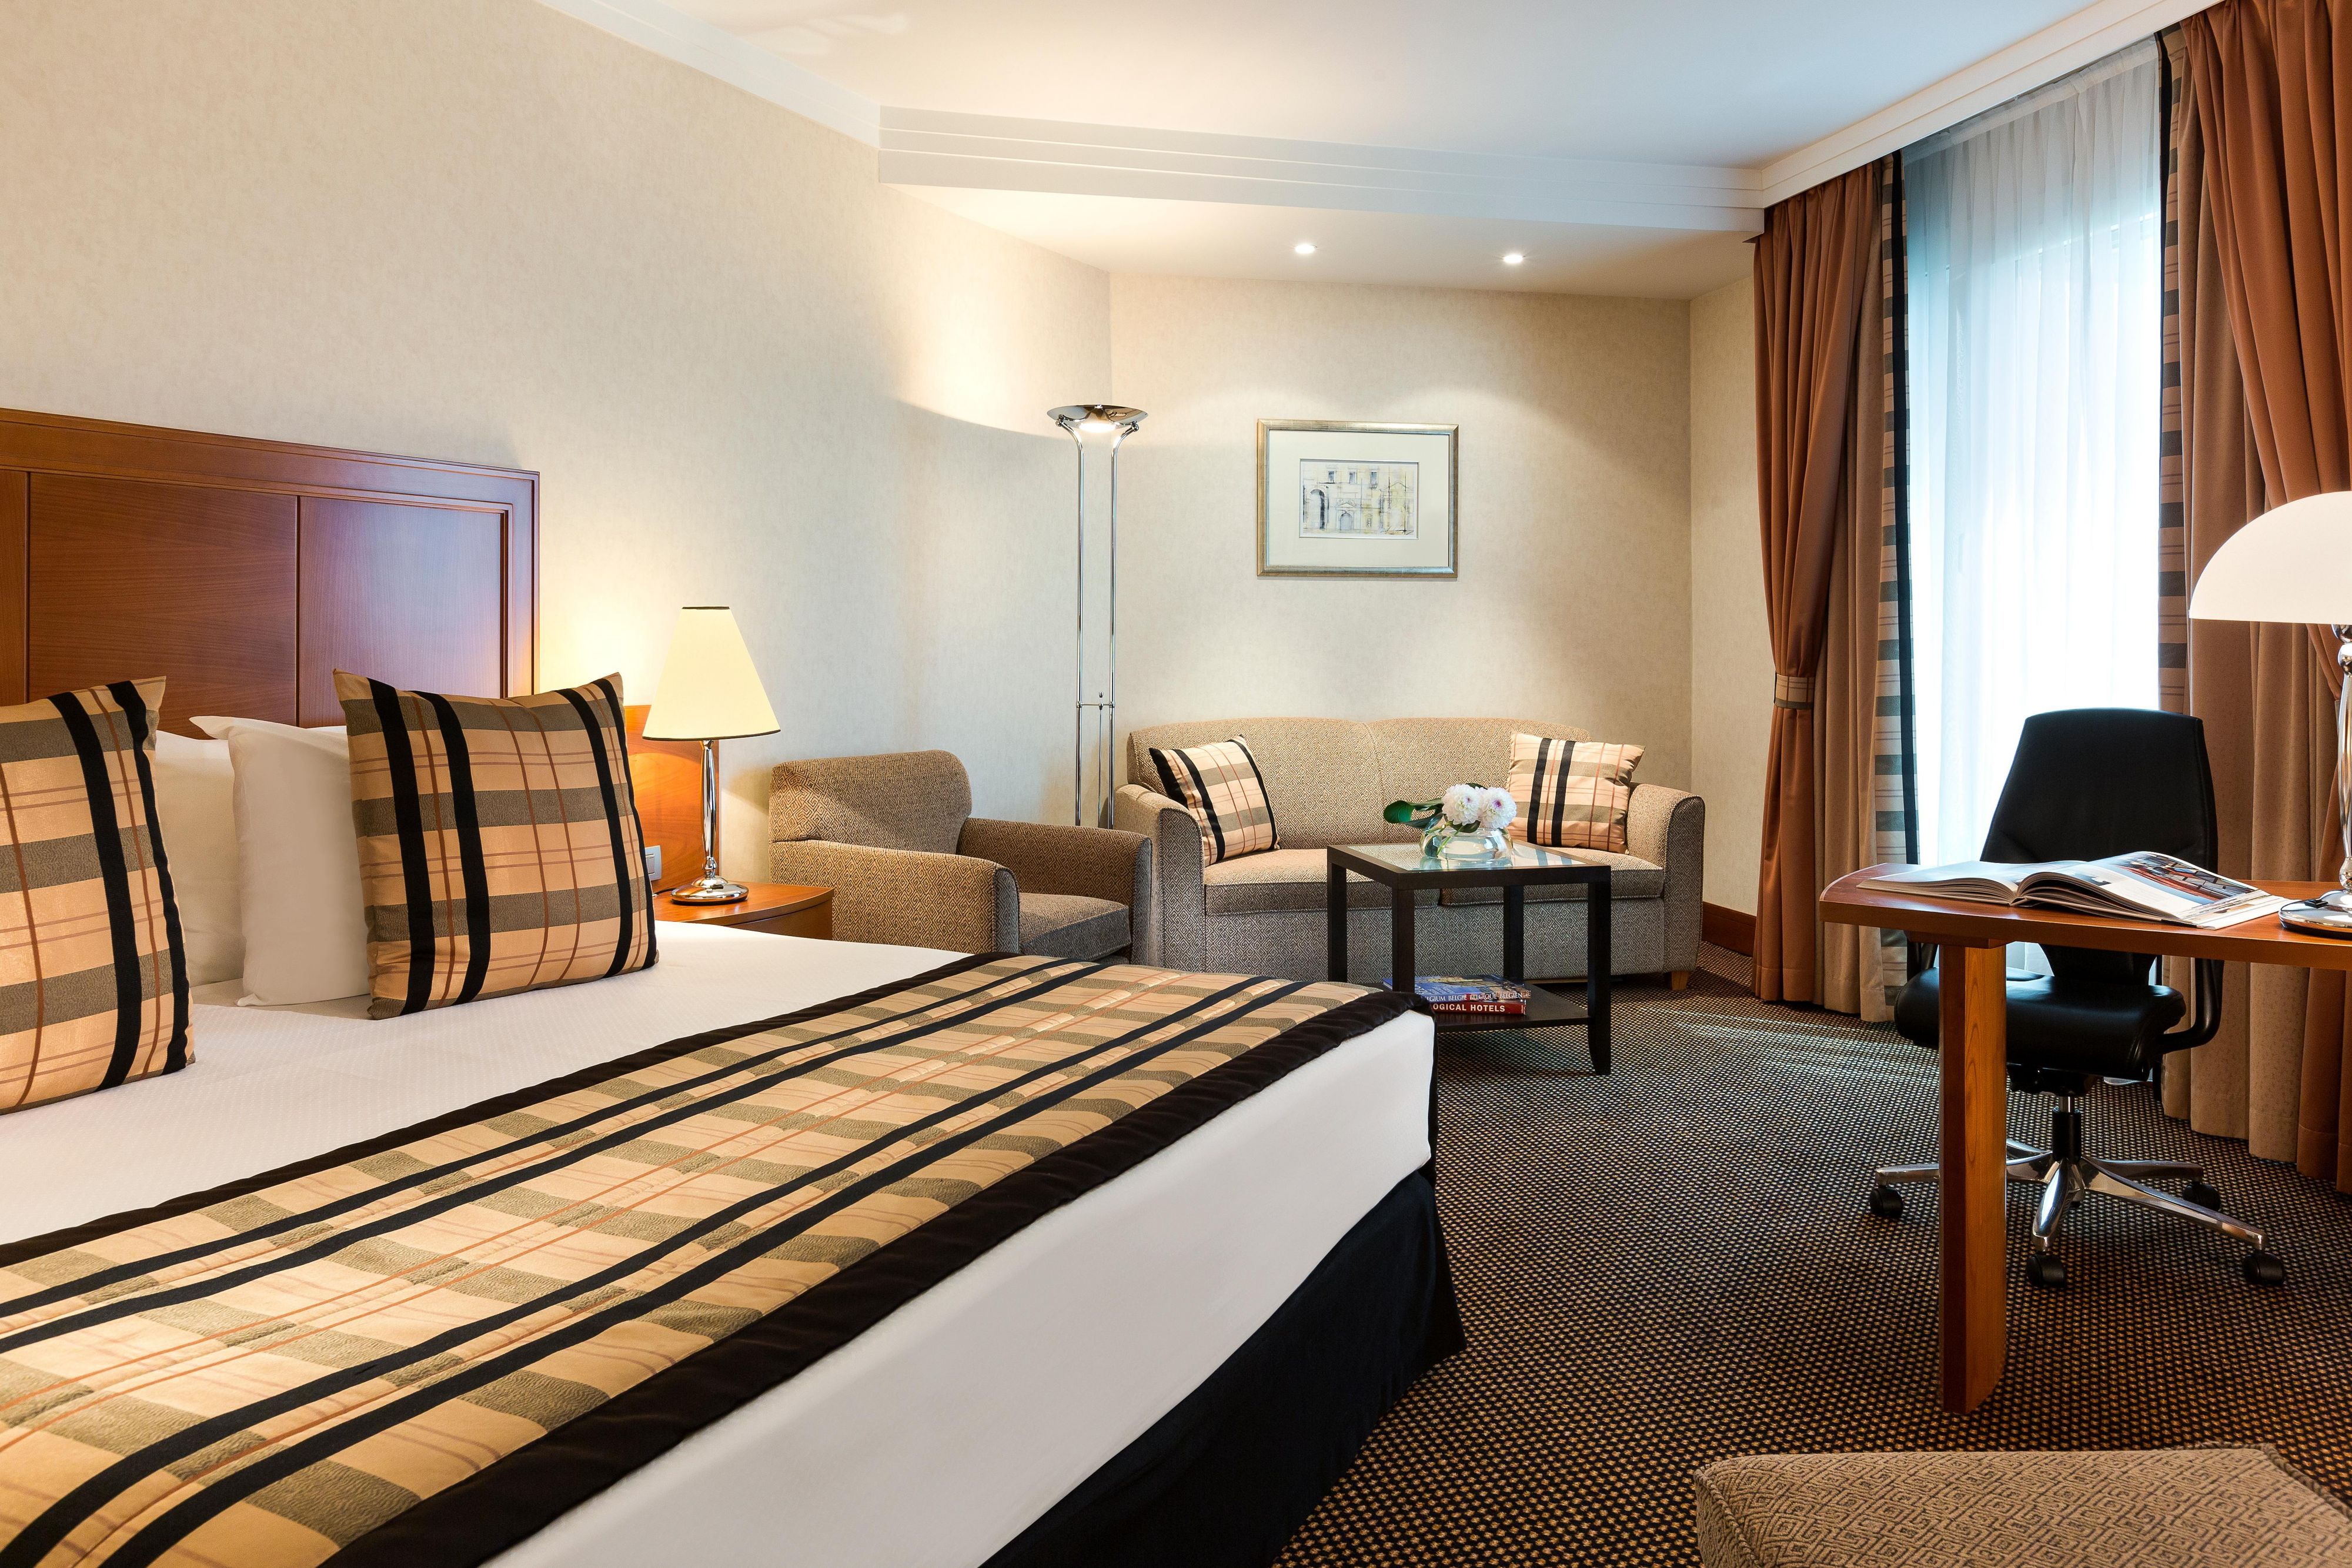 Enjoy extra space in a Junior Suite with a cosy sitting area